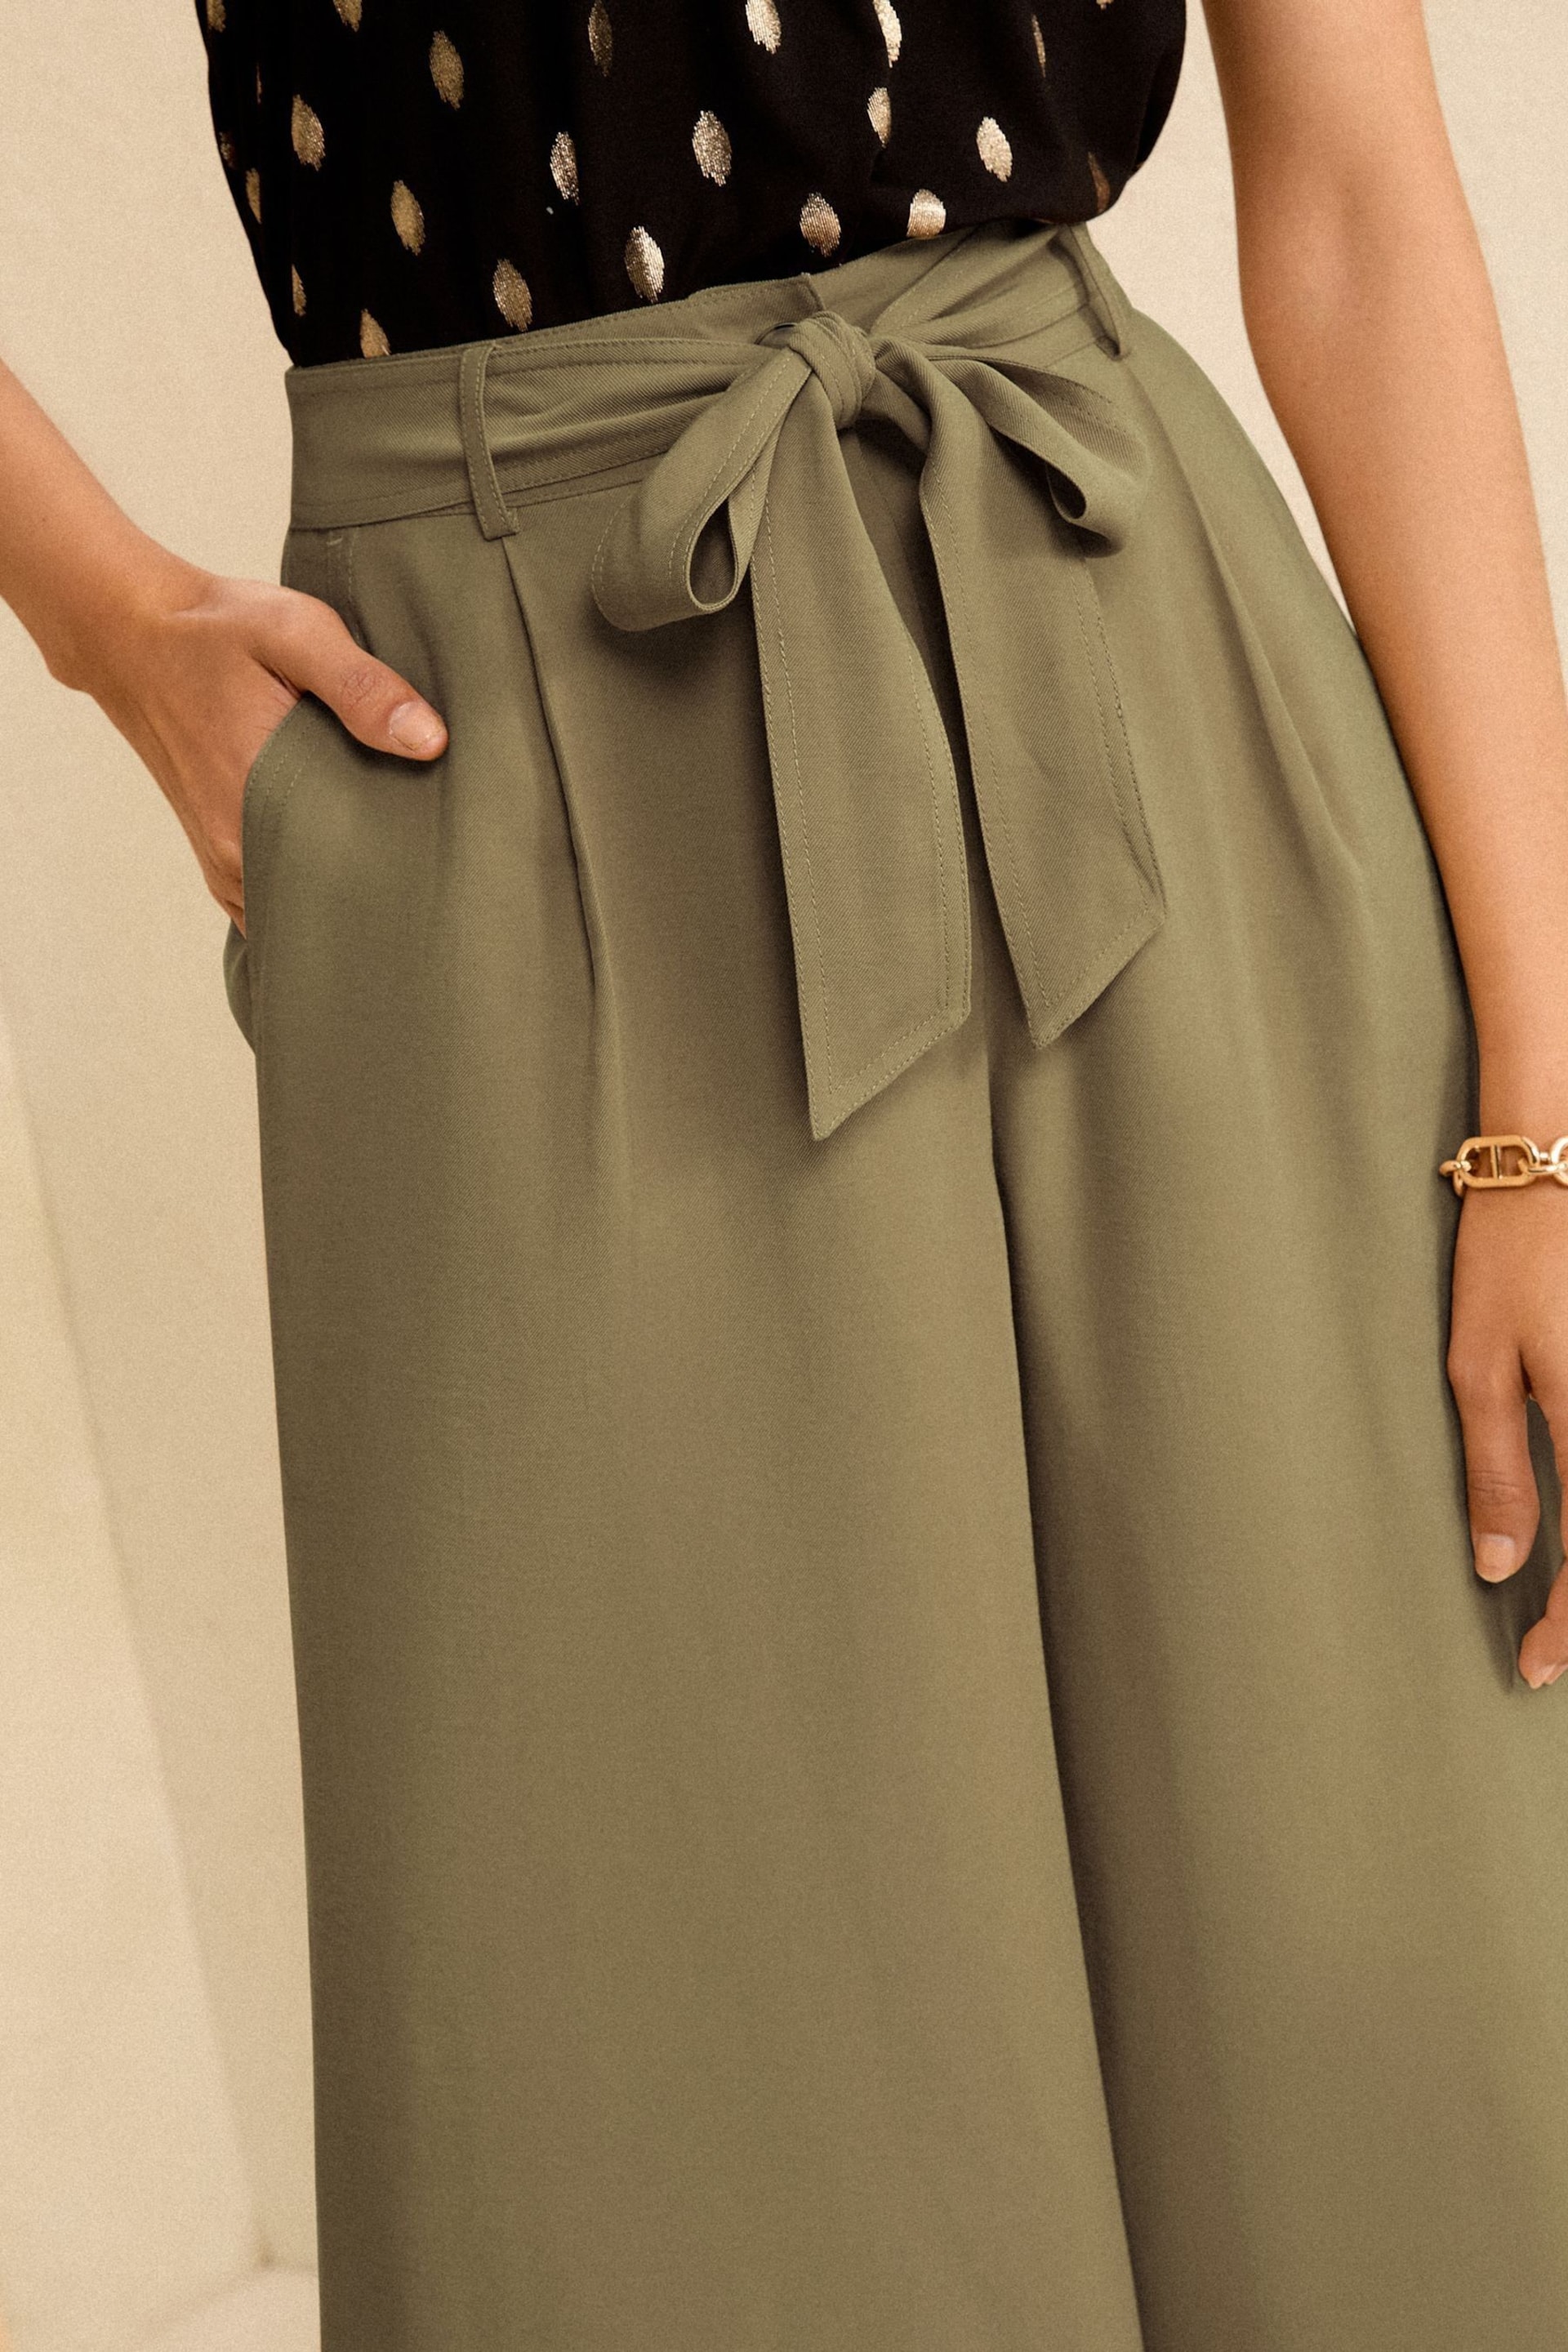 Love & Roses Khaki Green Petite Tie Front Wide Leg Trousers - Image 2 of 4